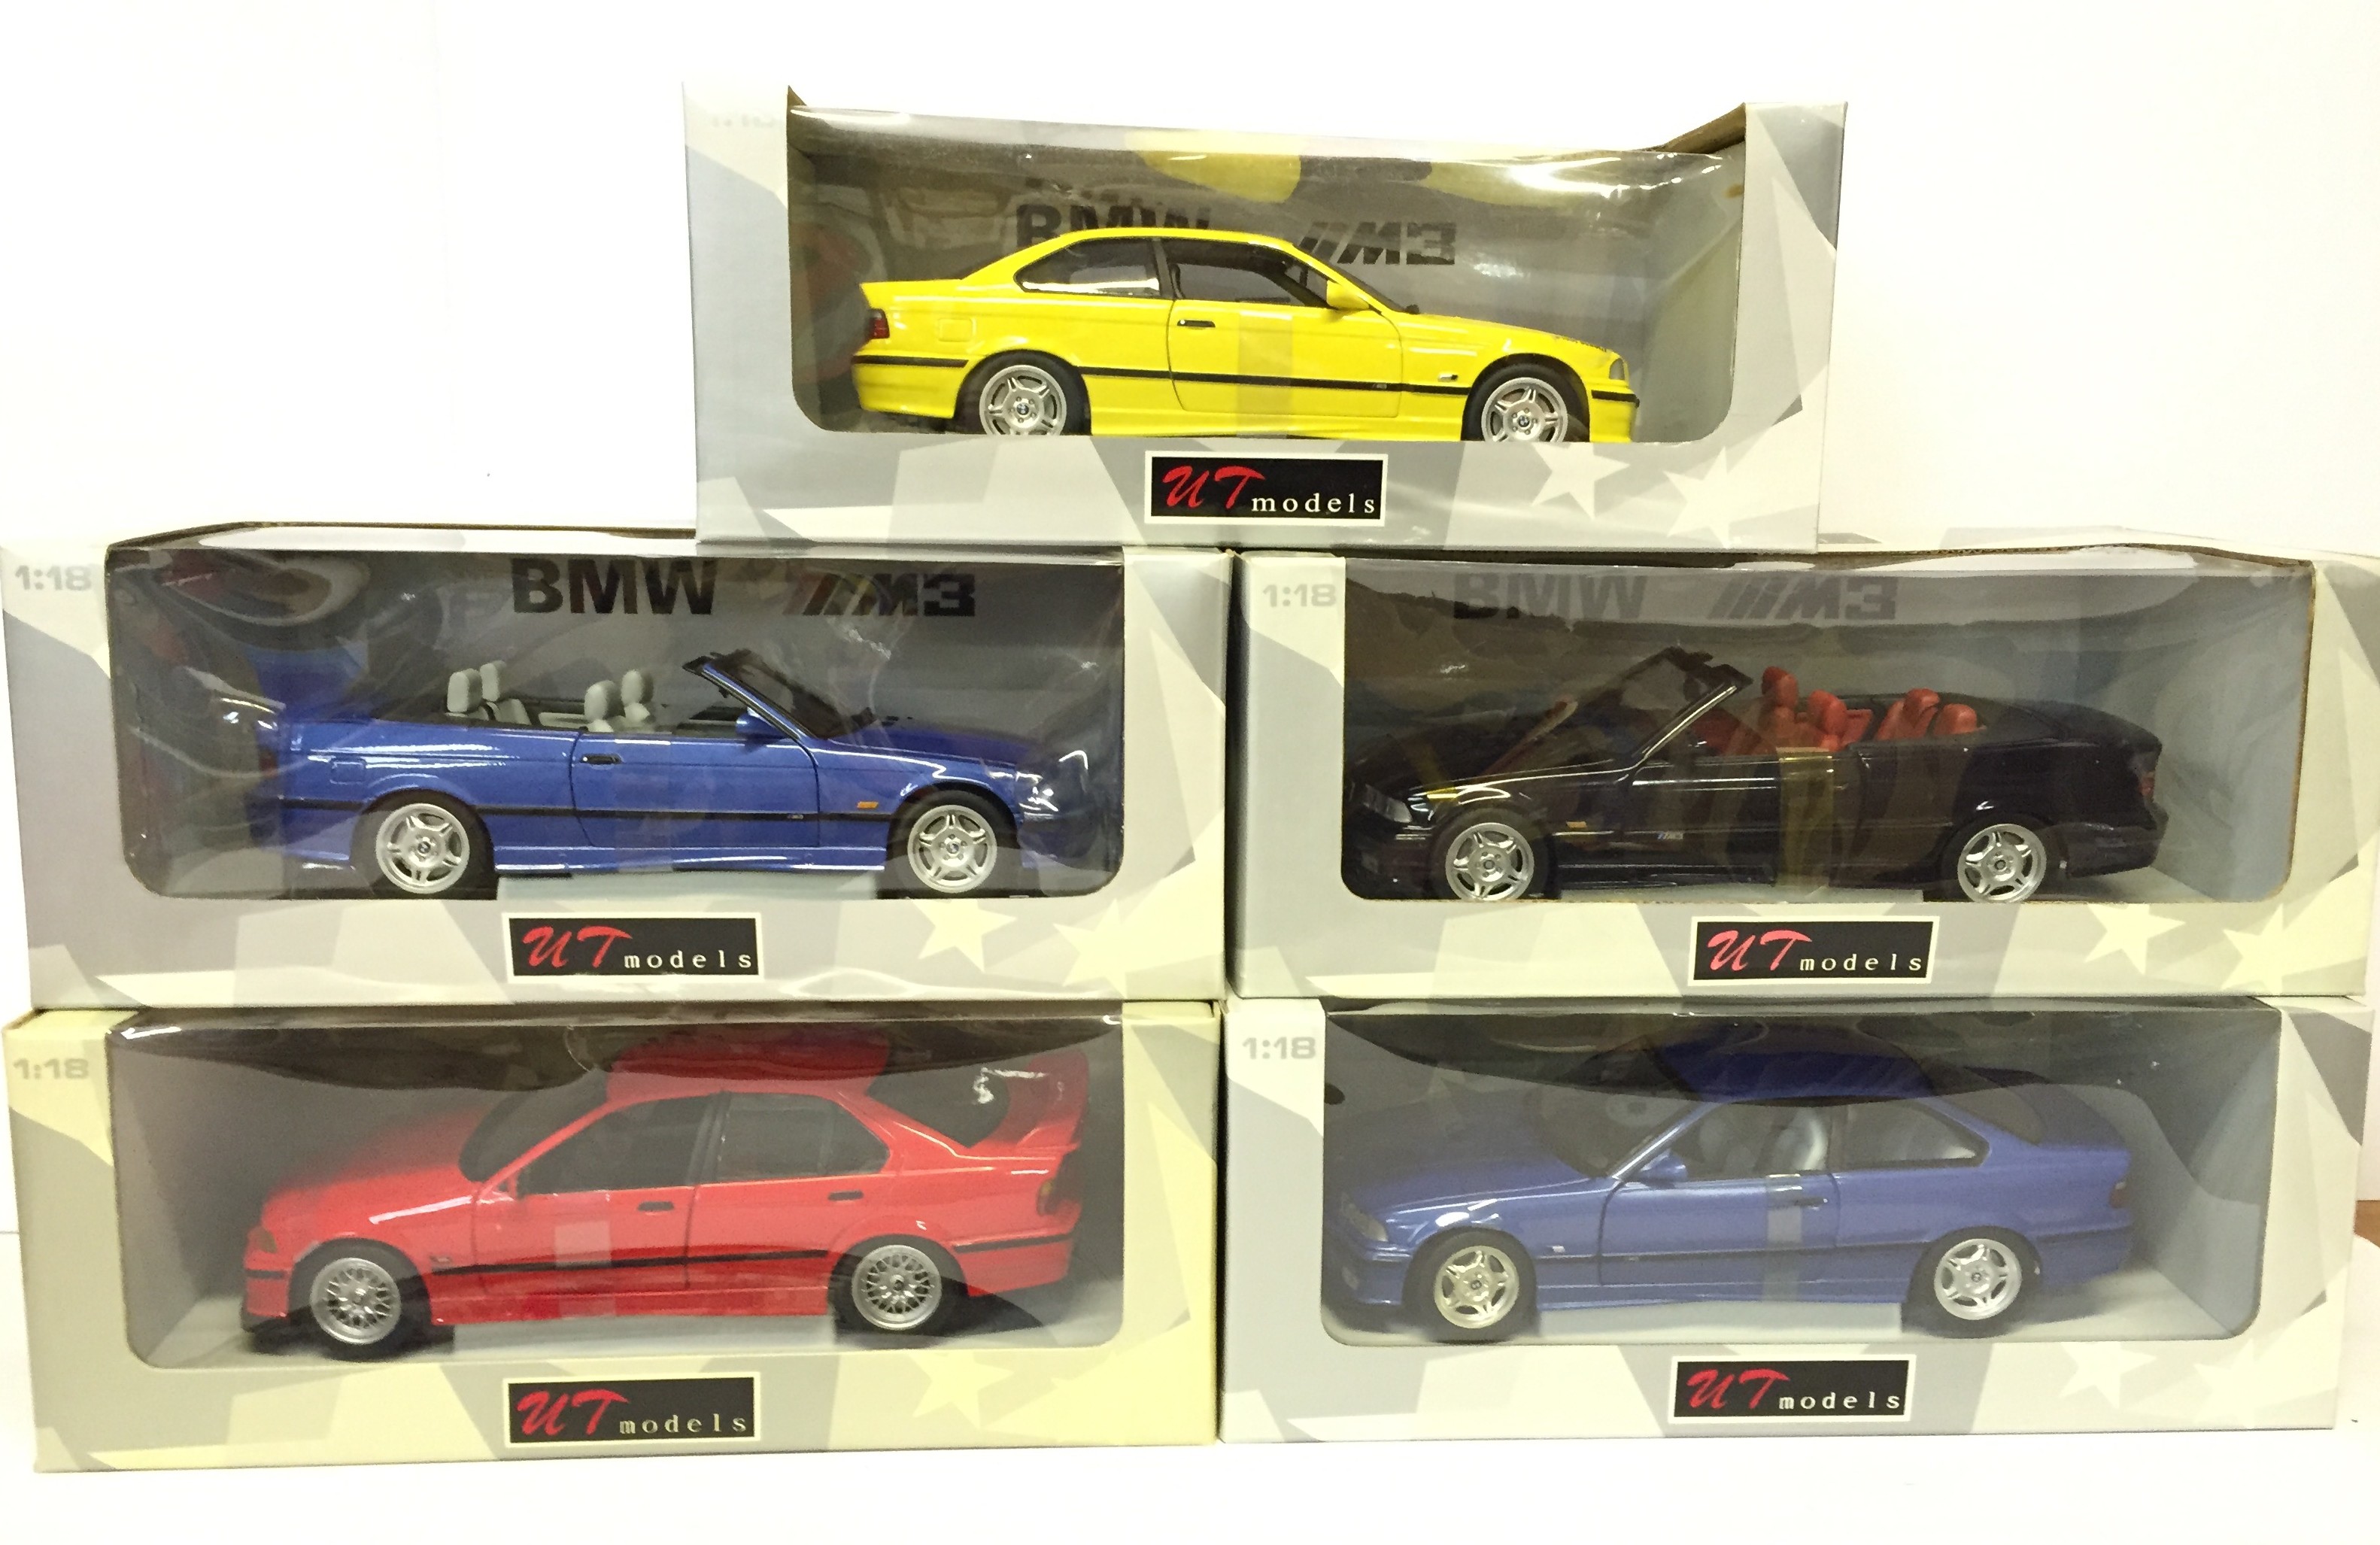 Five UT Models 1/18 scale BMW diecast models: 2 x M3 Cabriolet in techno-violet and black;